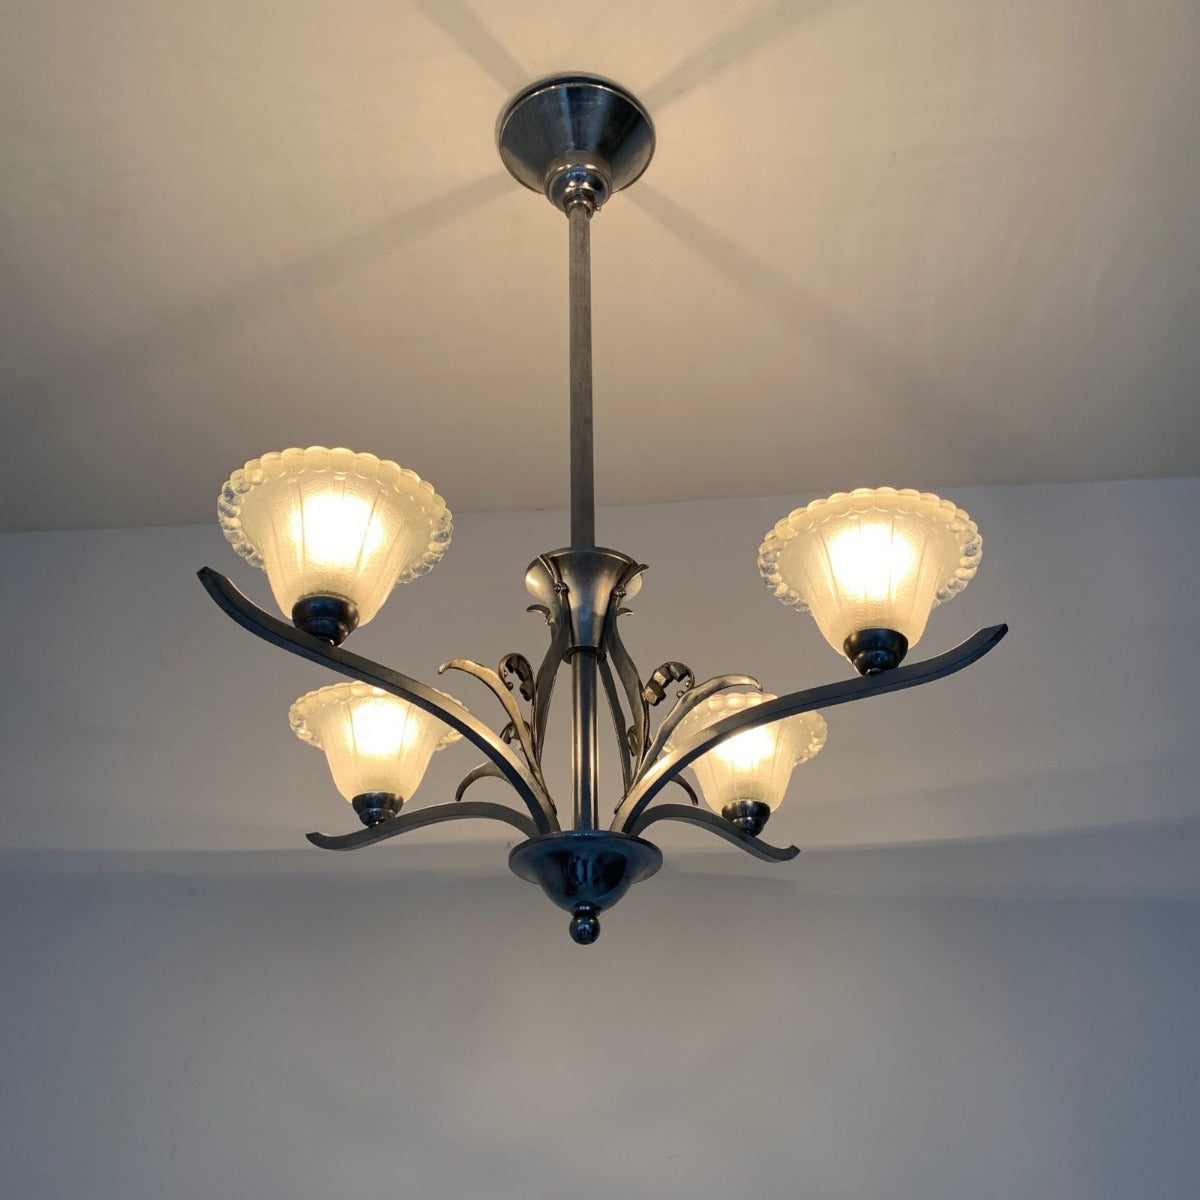 Art Deco Silver Nickelled Chandelier With Frosted Glass Shades